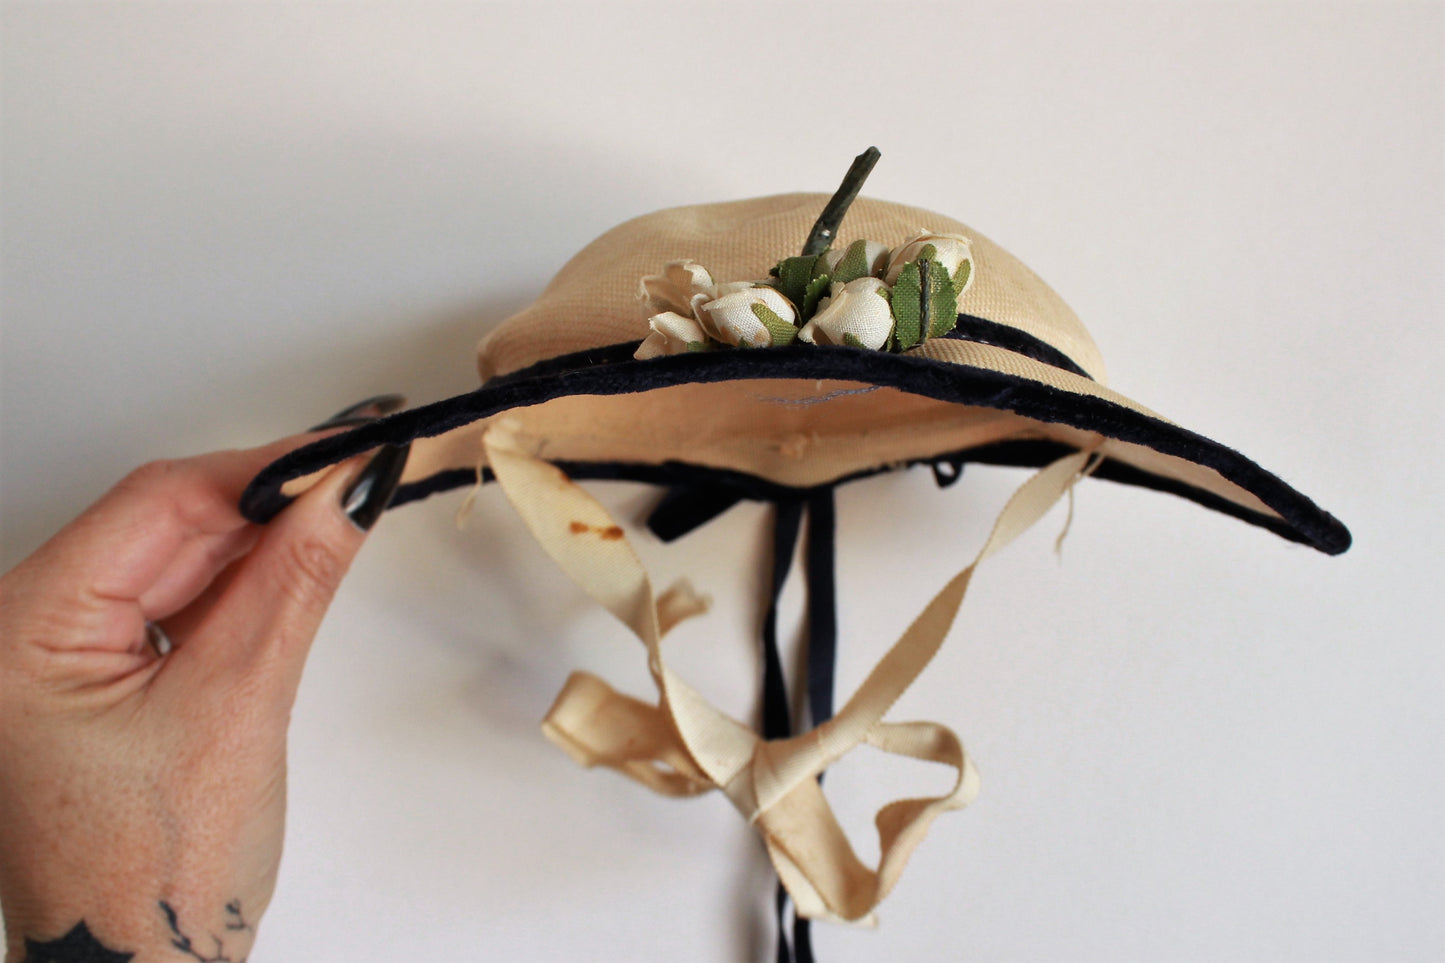 Vintage 1940s Straw Hat with Velvet Ribbon Trim and Flowers